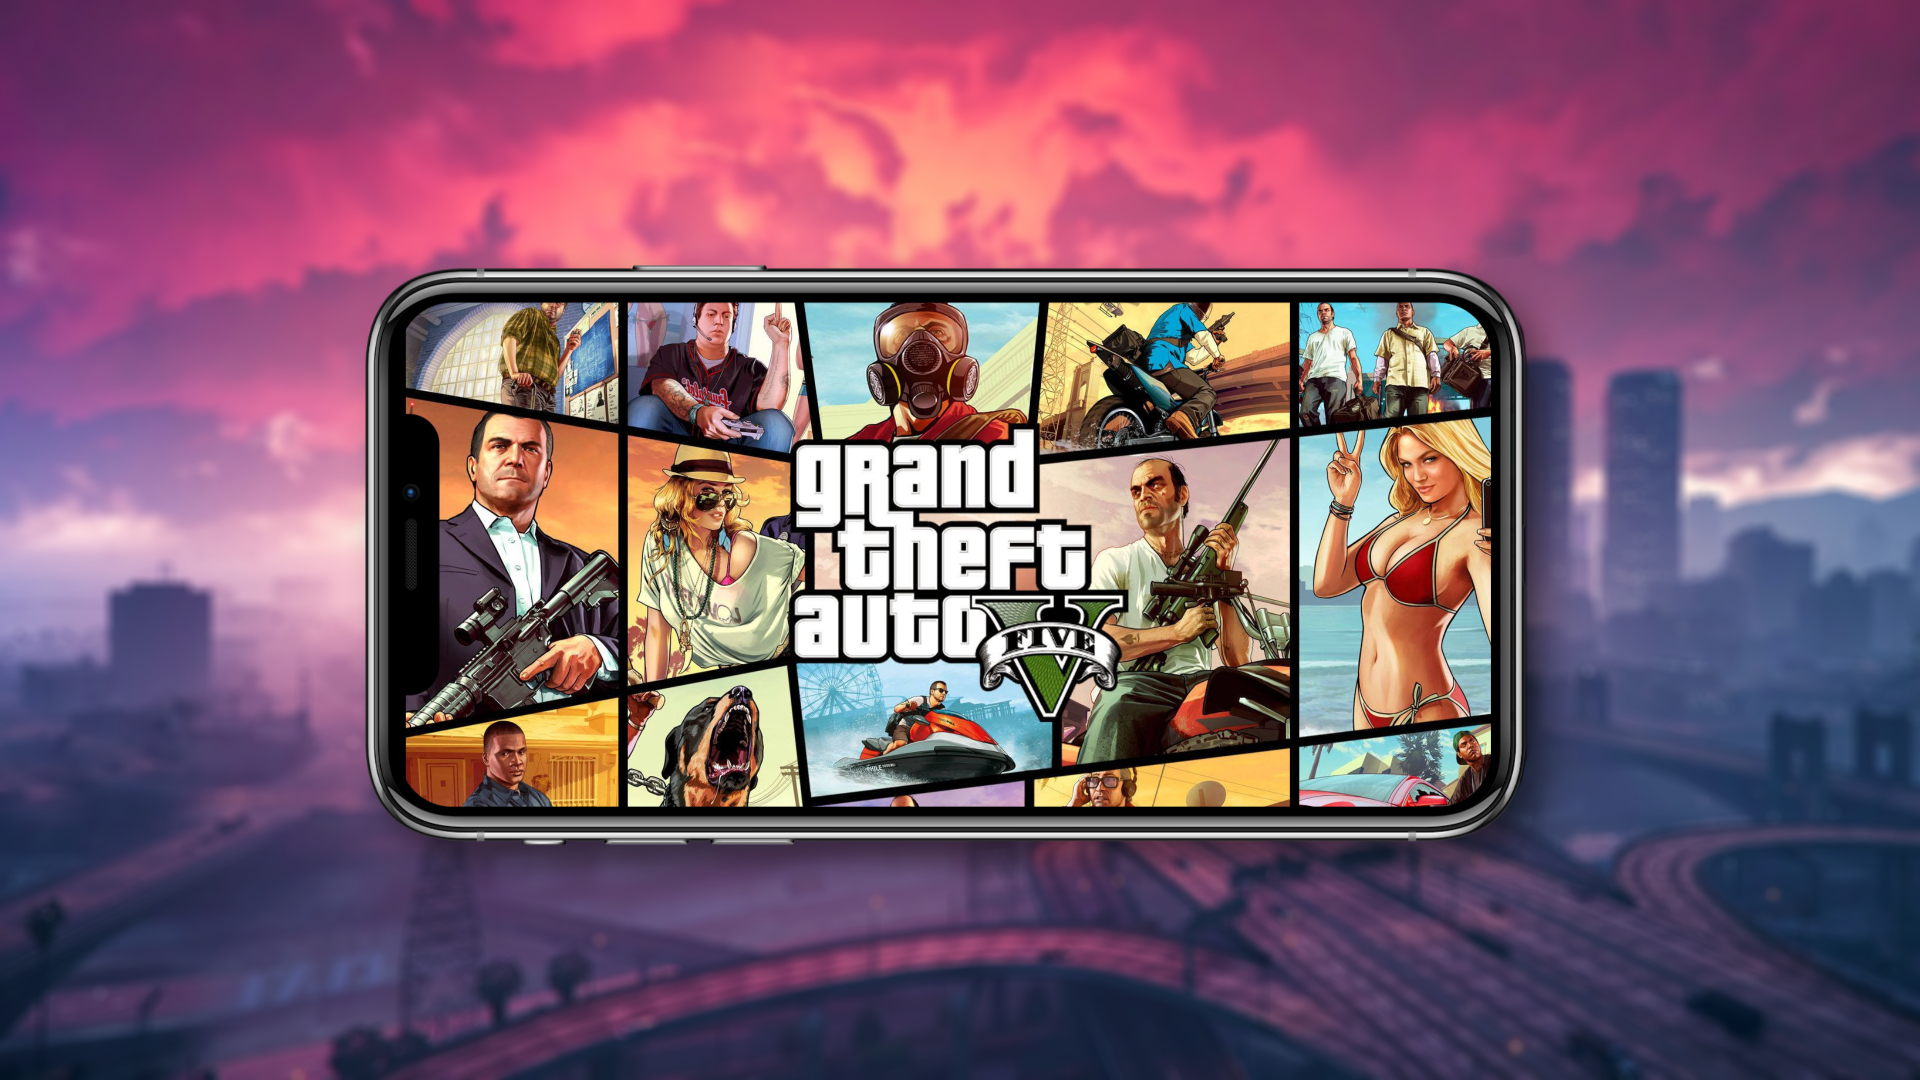 Netflix reportedly eyes GTA as it aims to move beyond the mobile market to  higher-end games